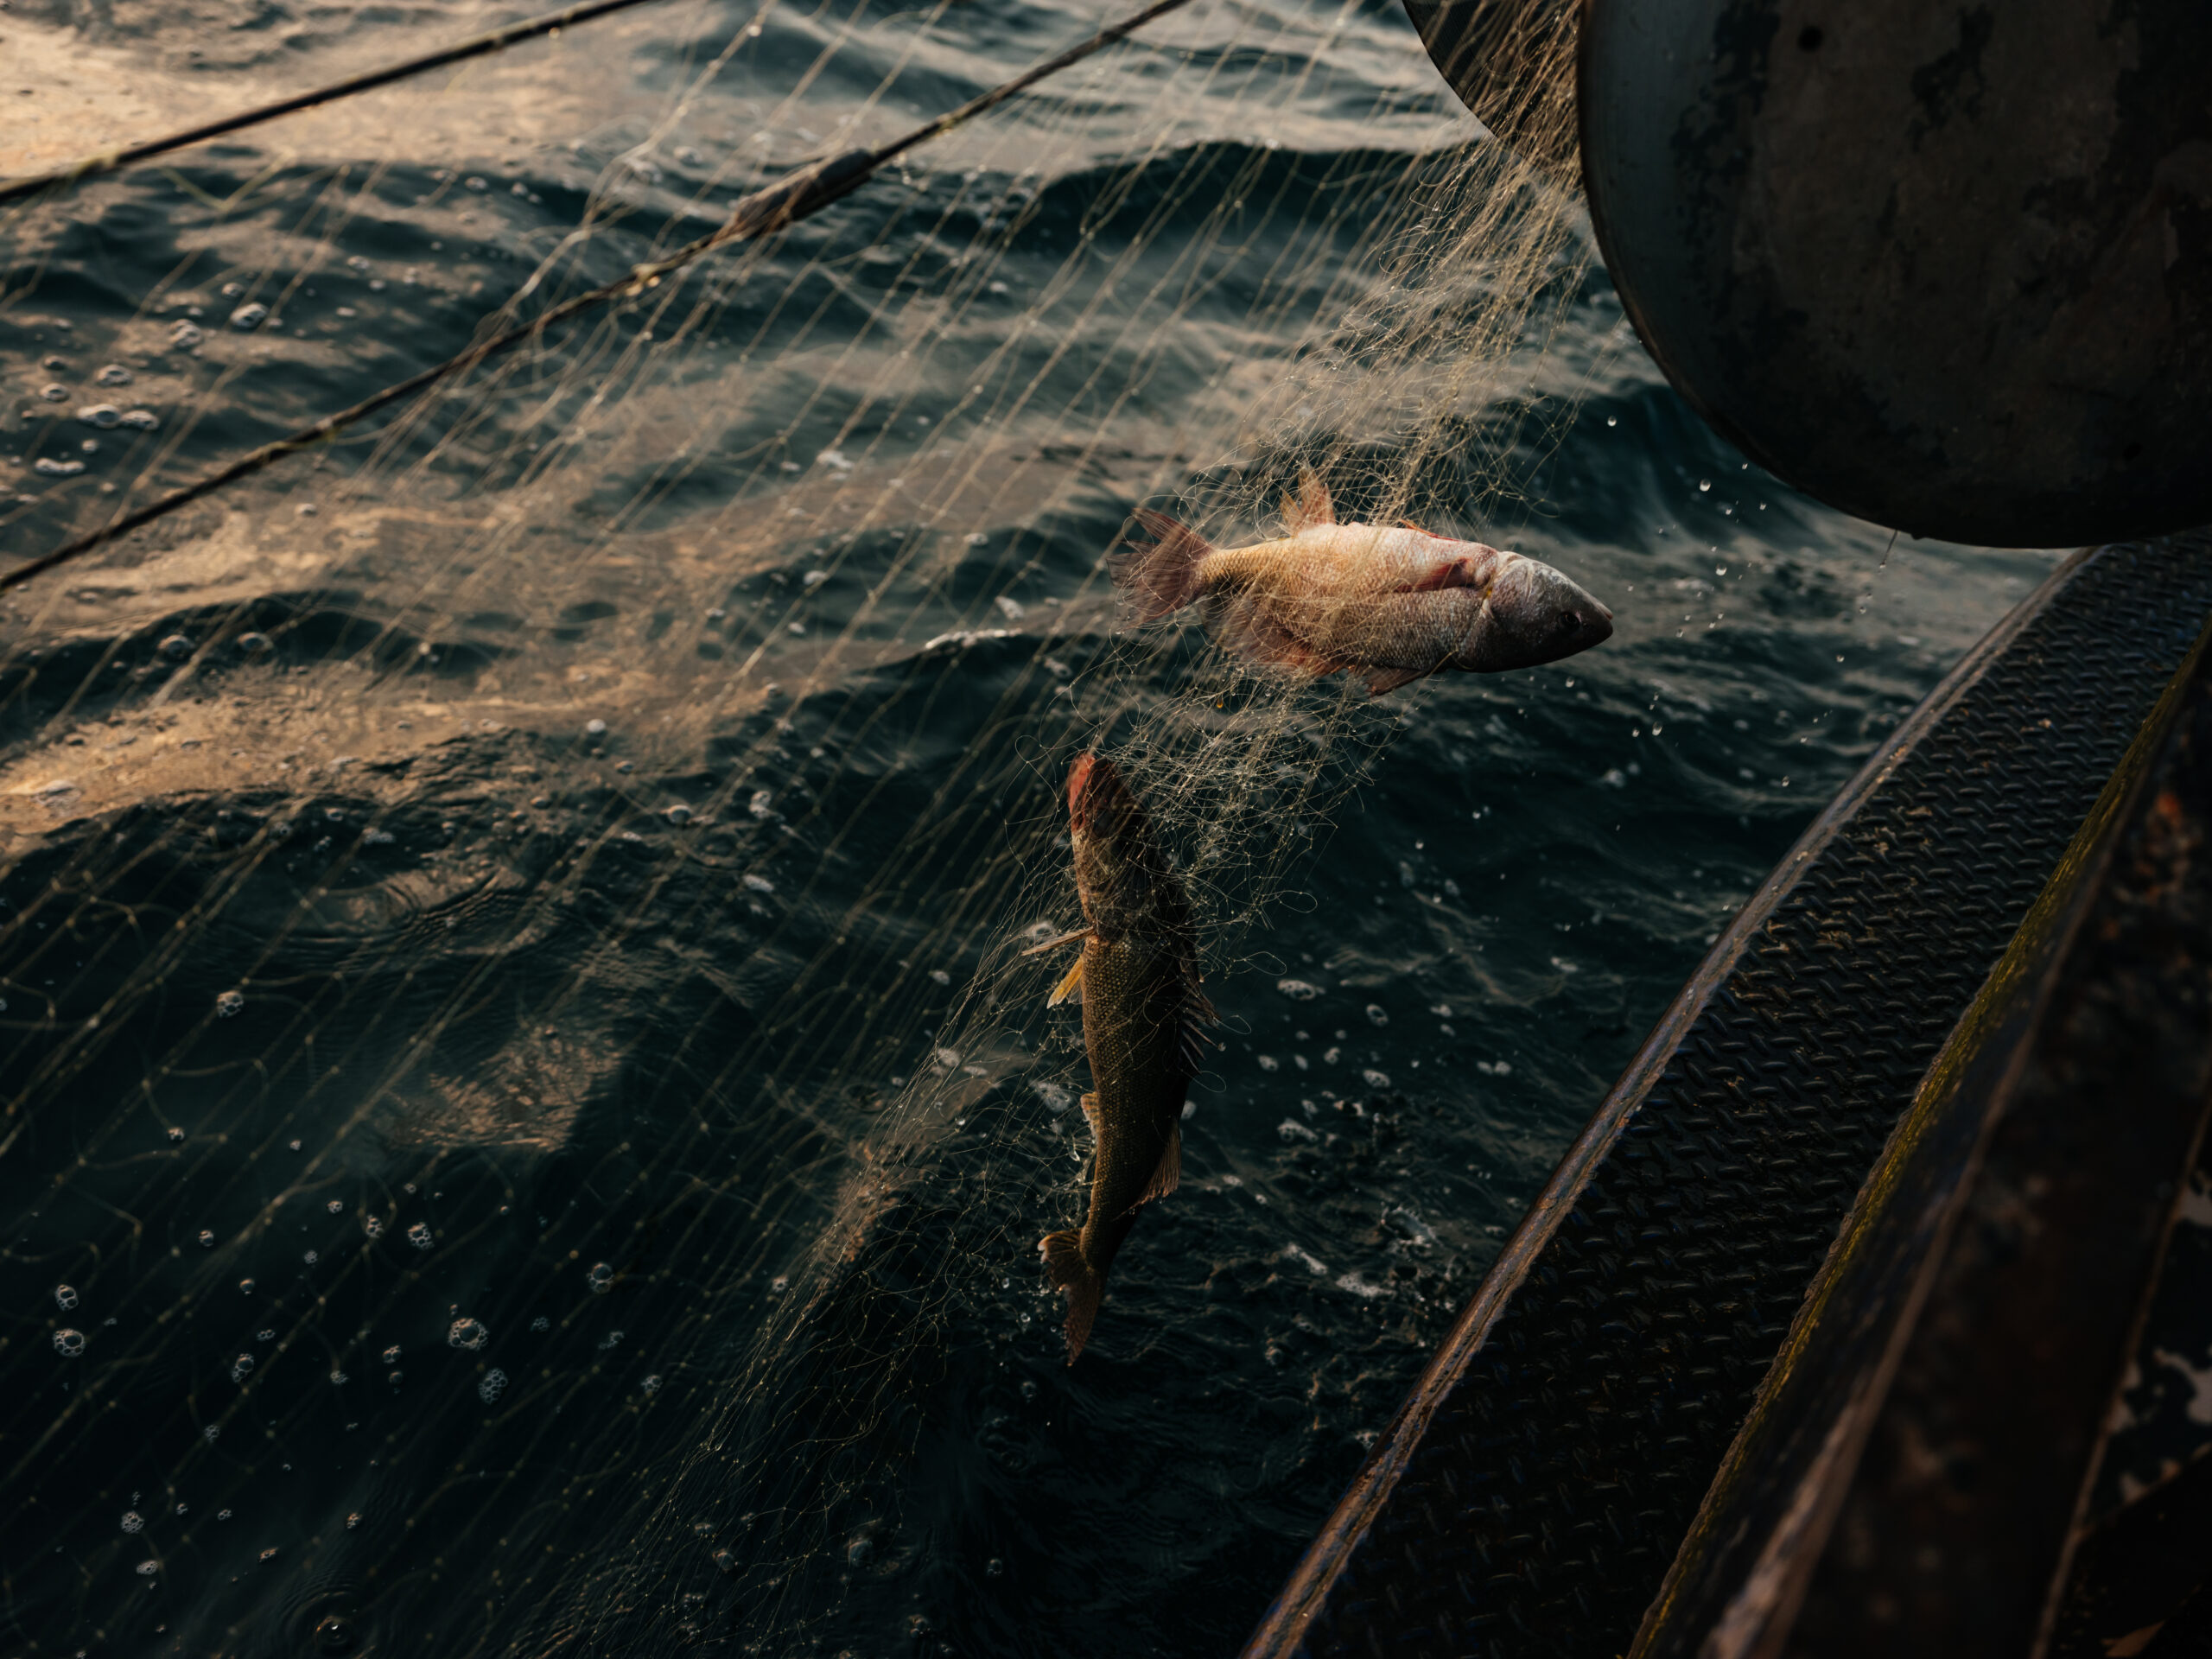 Fish caught in a net being hauled onto a Lake Erie commercial fishing boat.